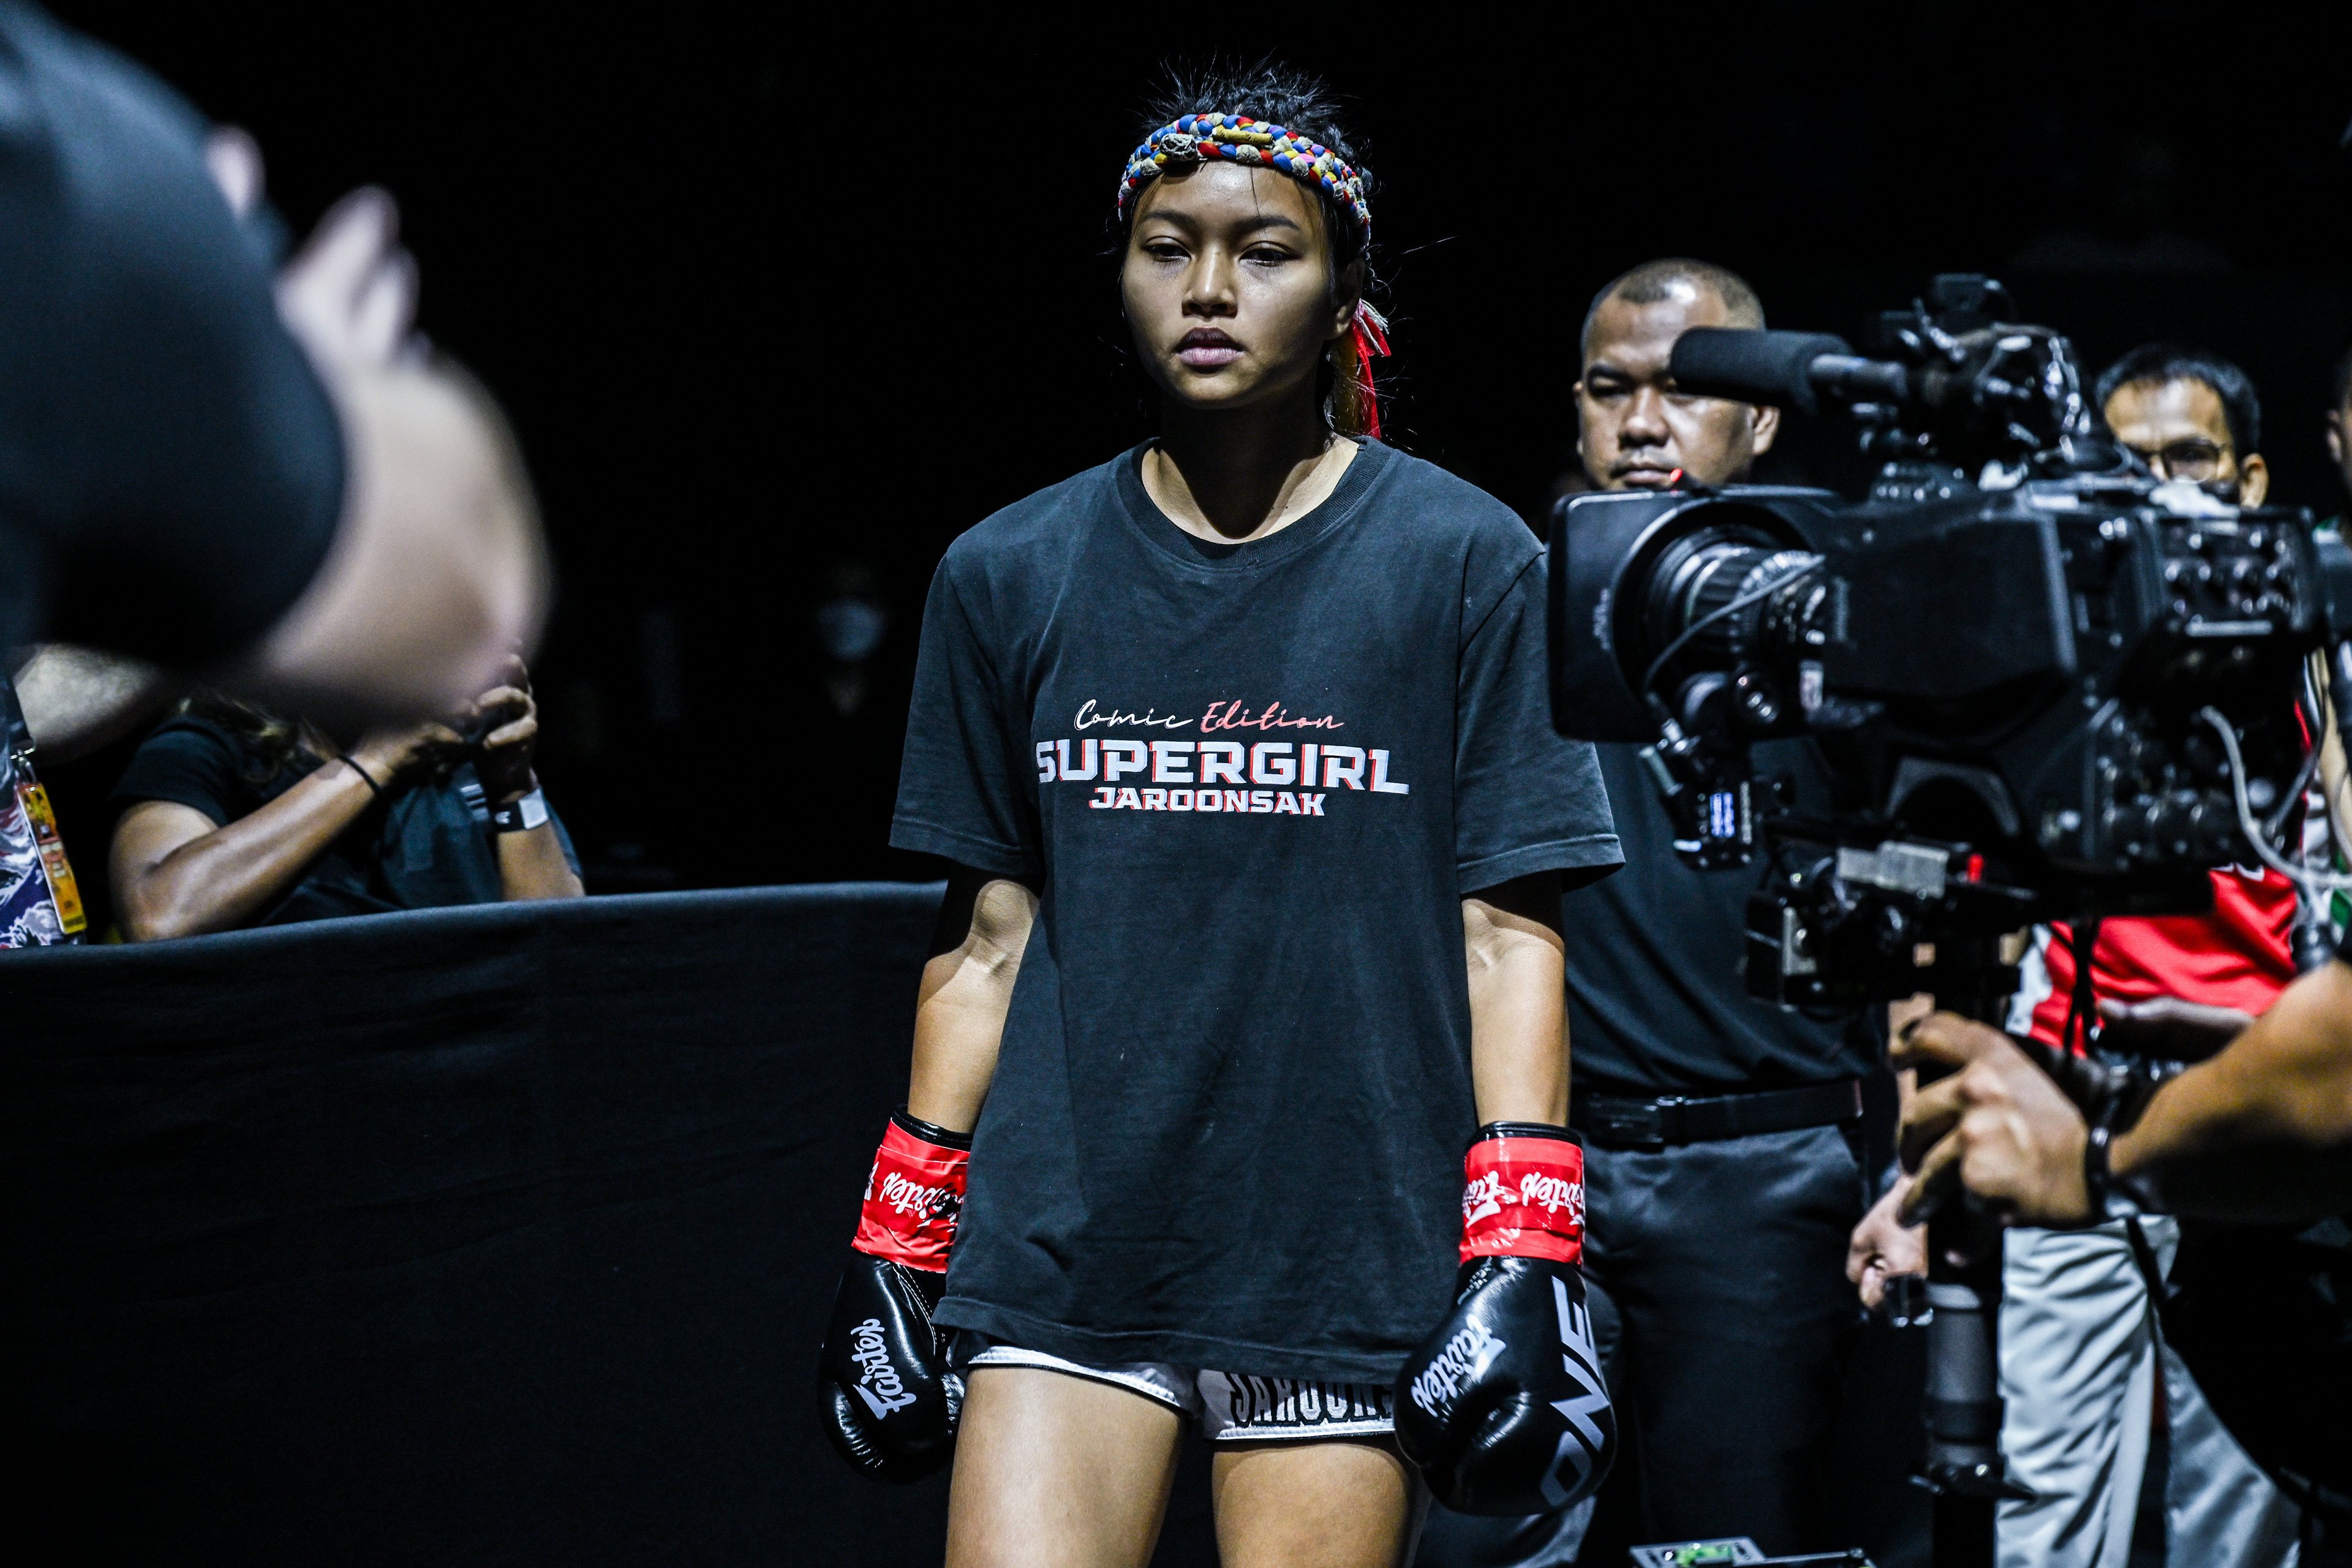 Supergirl heads to the ring to face Cristina Morales. Photos: ONE Championship